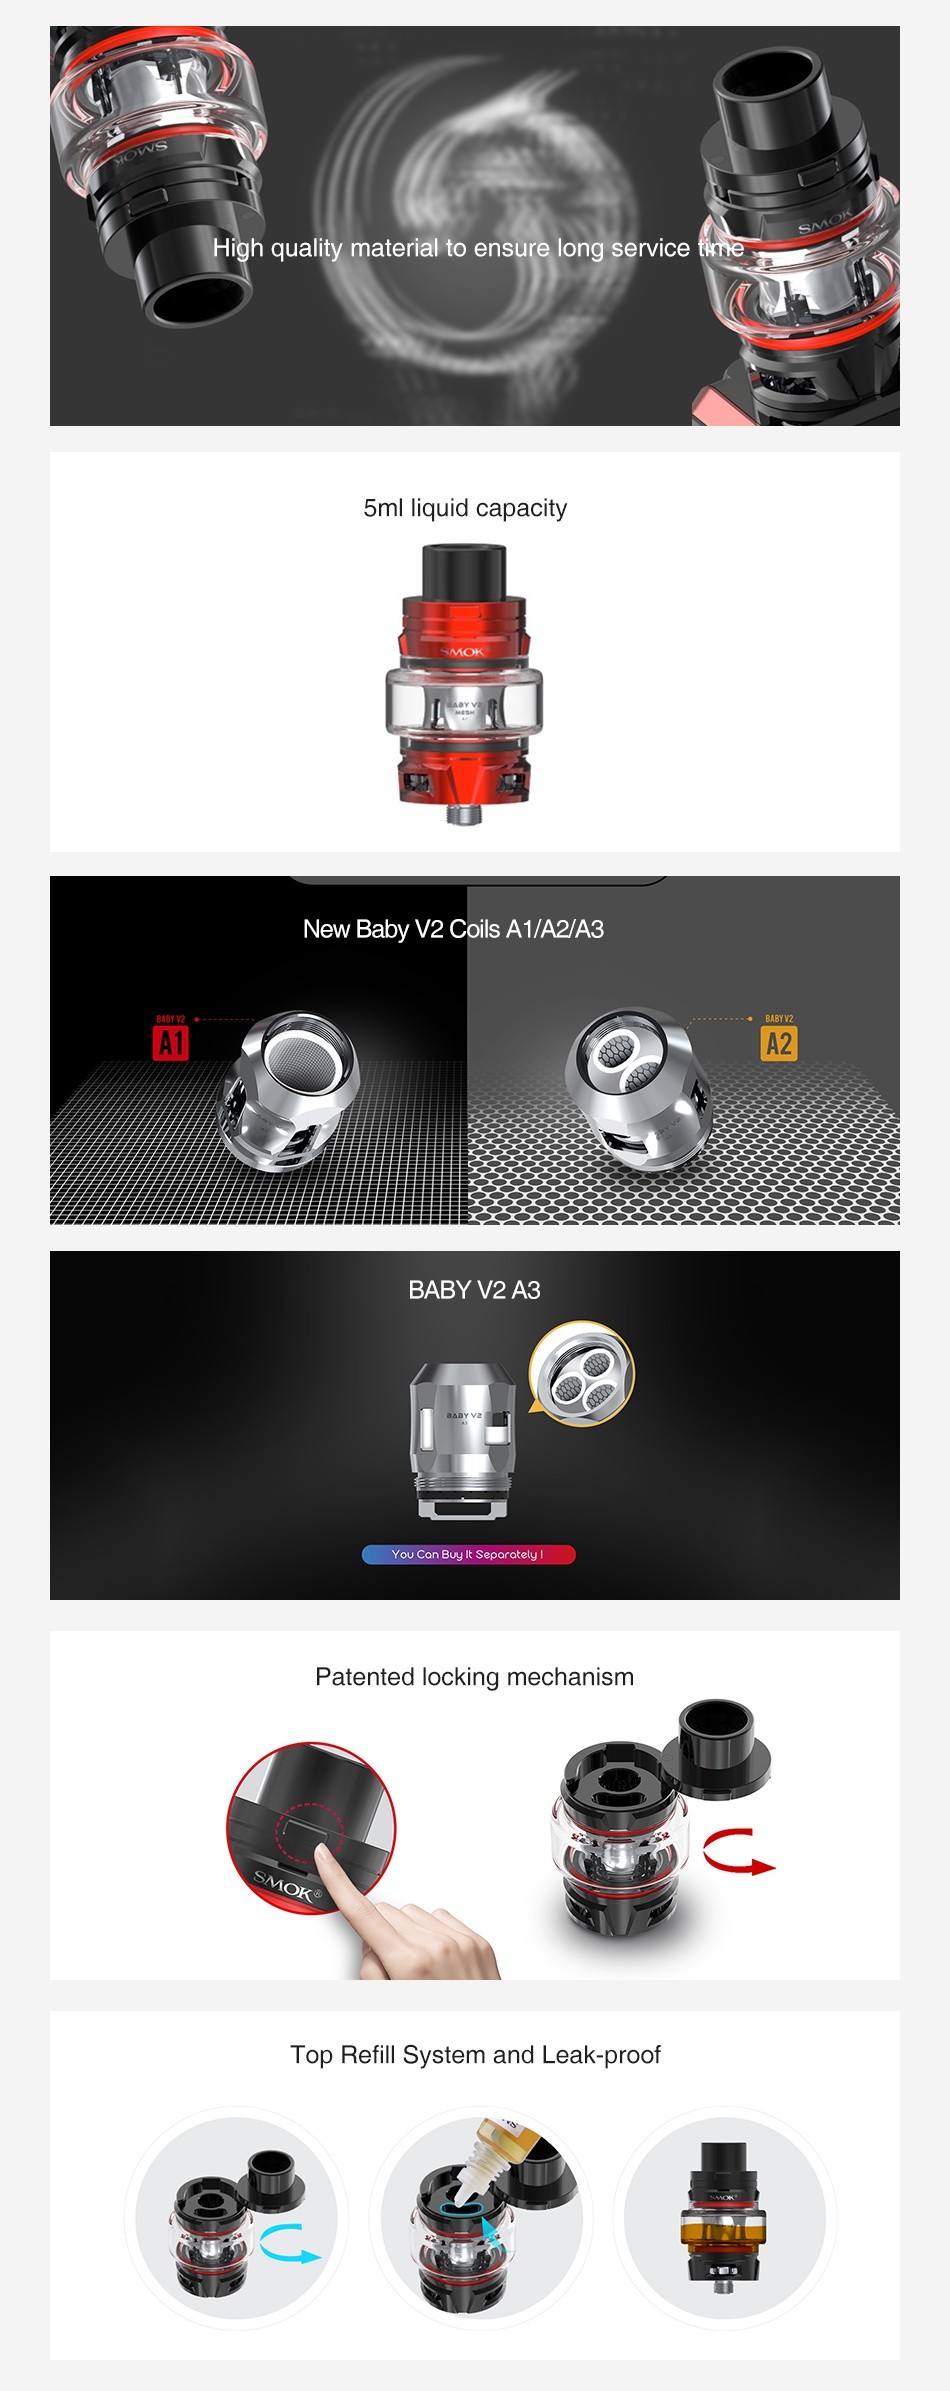 SMOK TFV8 Baby V2 Tank 5ml High quality material to ensure long service te 5ml liquid capacity New Baby v2 Coils A1 A2 A3 AT A2 BABY V2 A3 Can Bu Patented locking mechanism Top Refill System and Leak proof